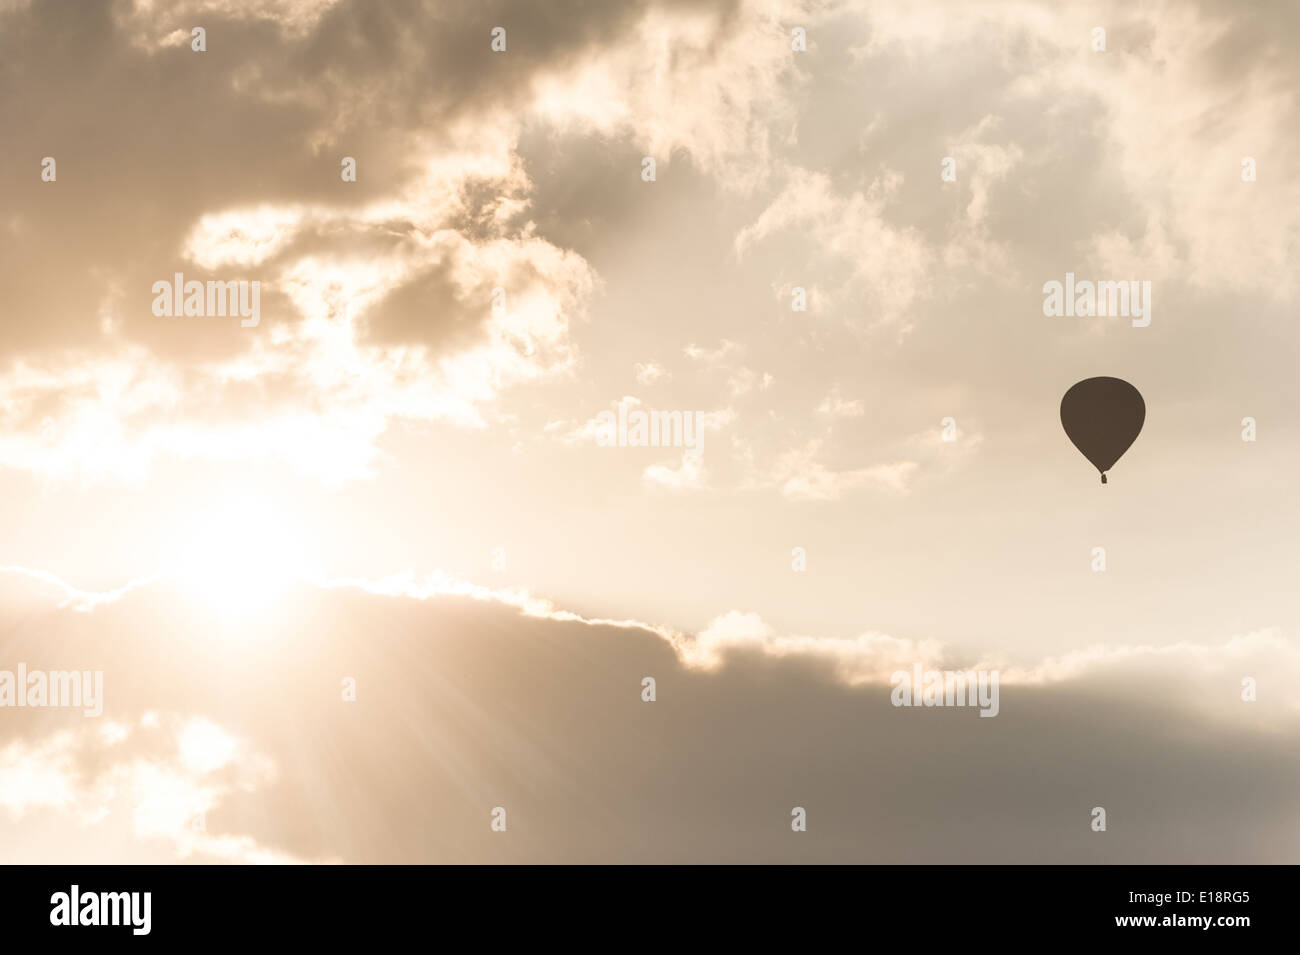 Amazing colors of sunrise with sunbeams over clouds and hot air balloon silhouette Stock Photo